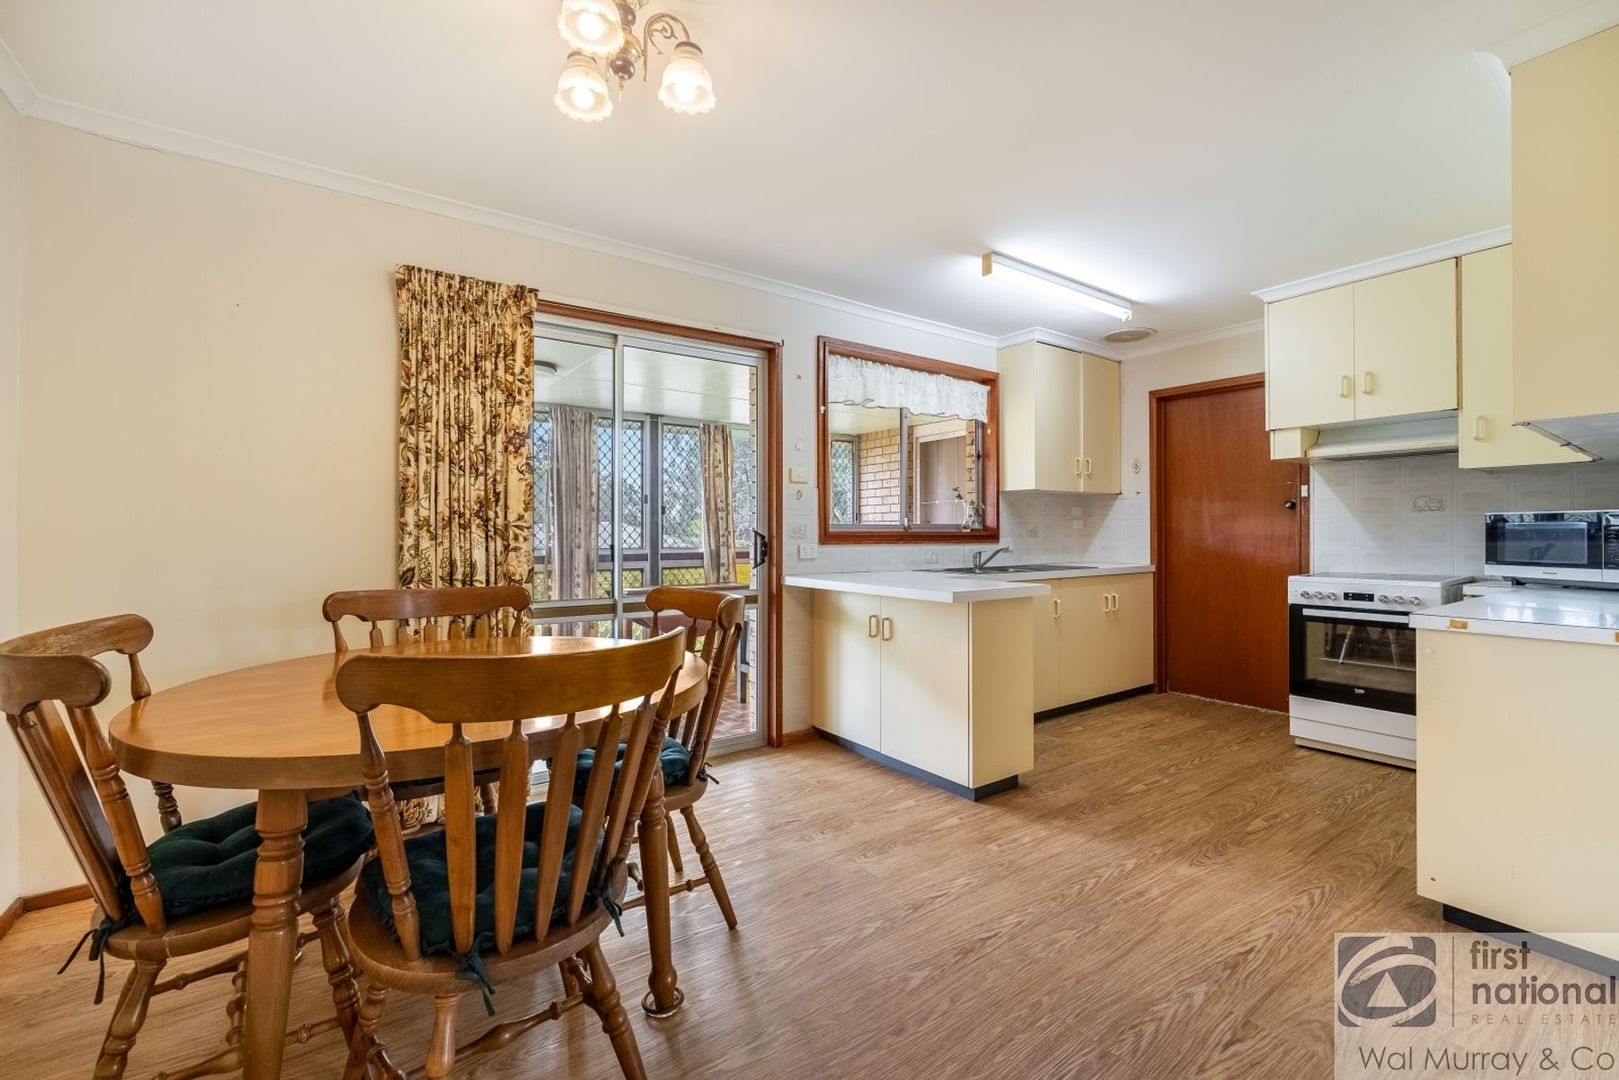 17 D'Arcy Drive, Goonellabah NSW 2480, Image 2